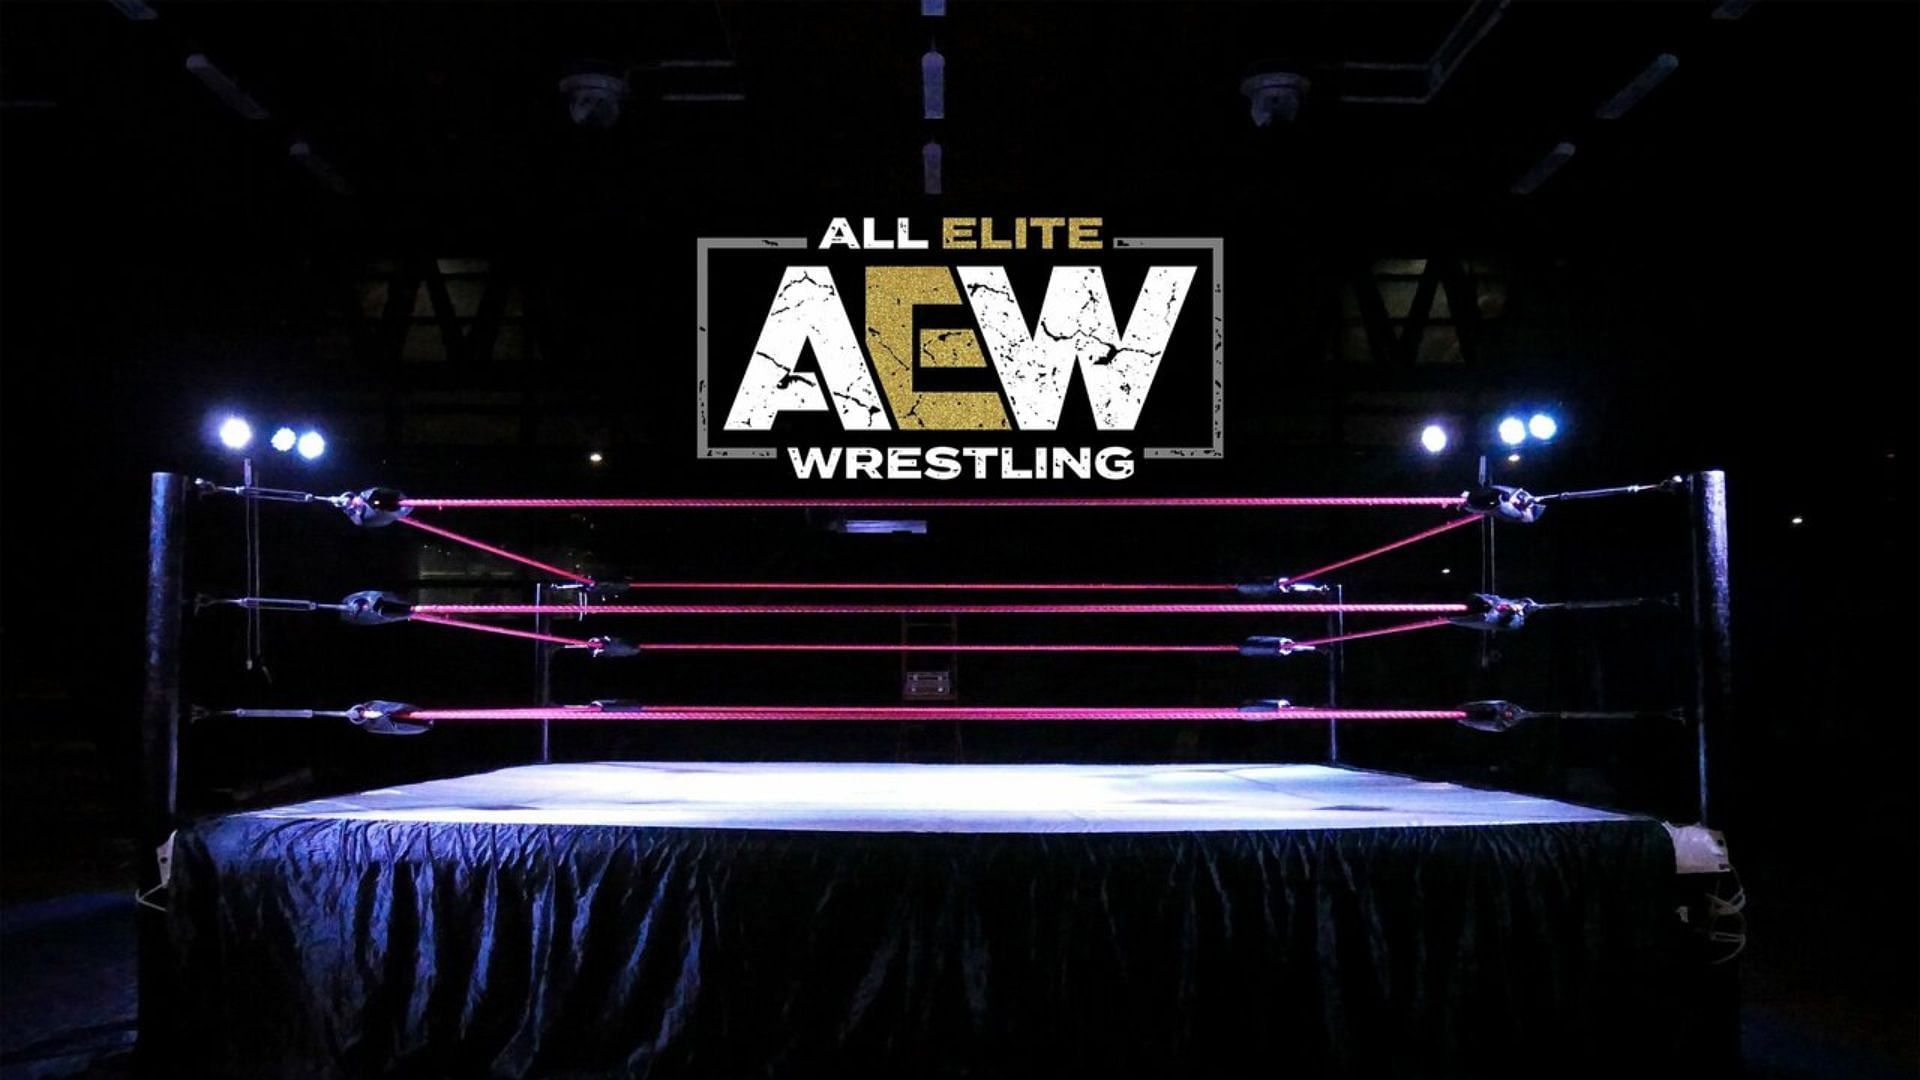 AEW is a major player in the wrestling industry